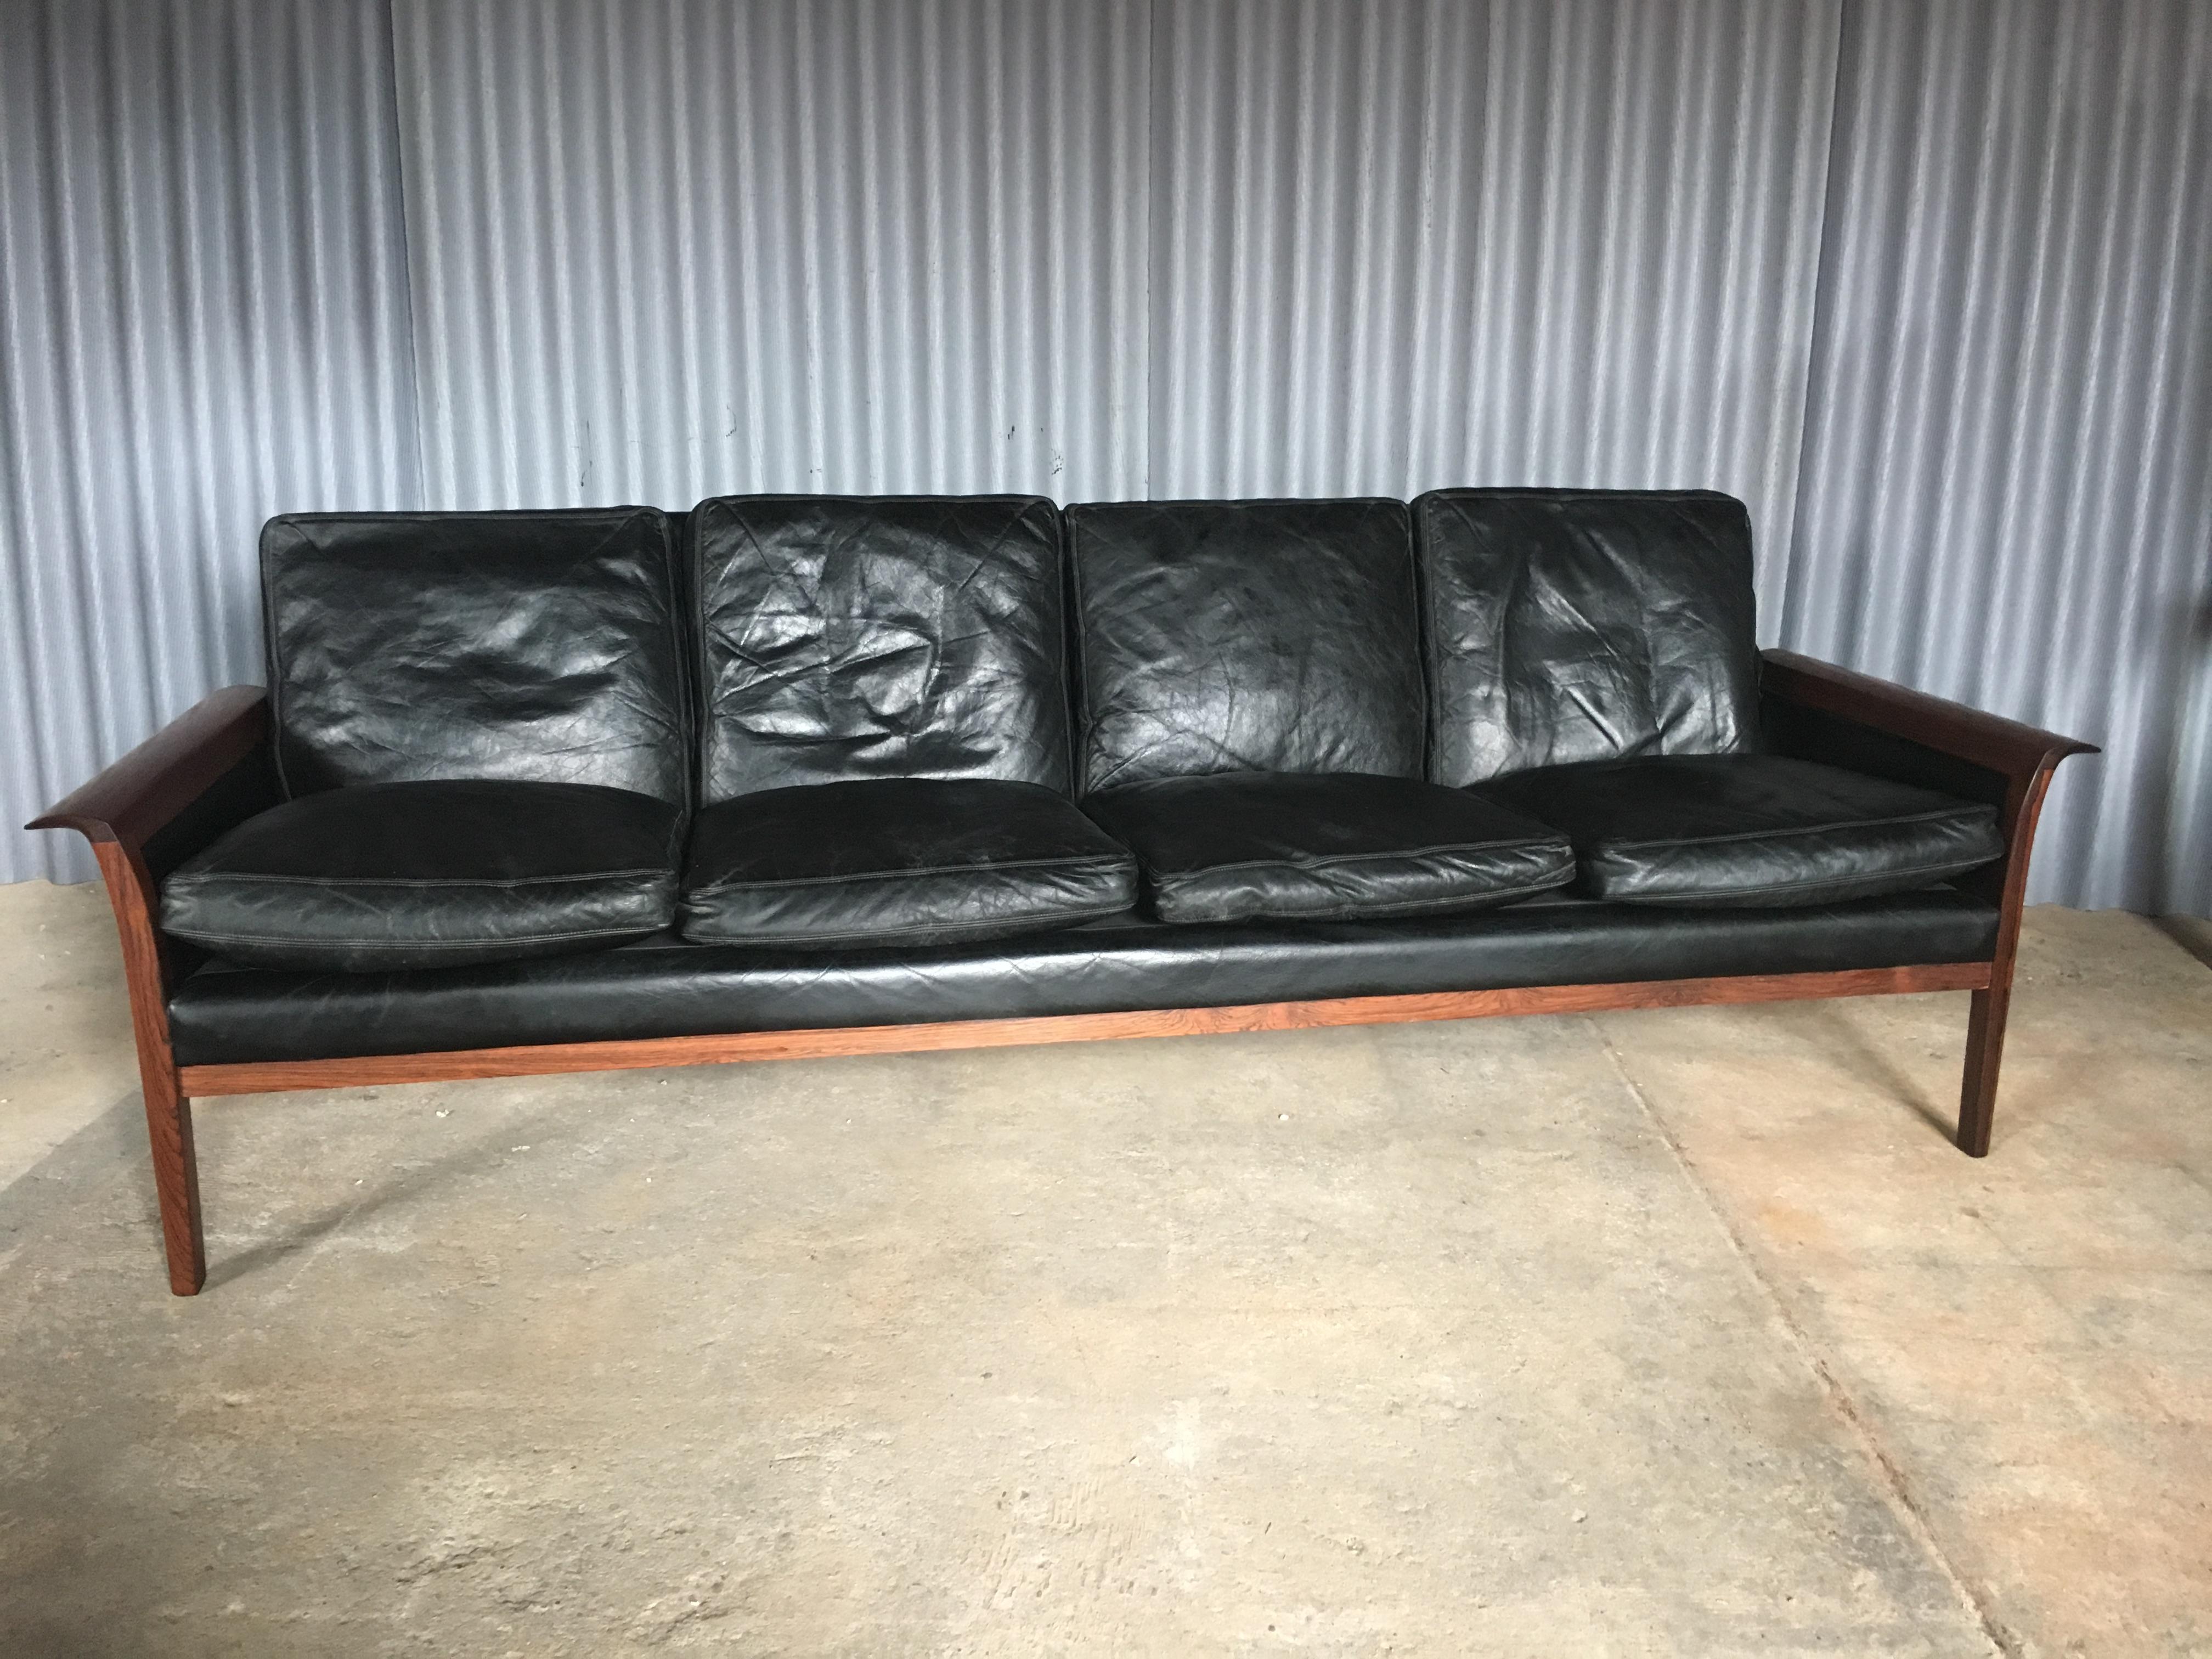 Handsome and rich 4 seater sofa by Designer Knut Saeter for Vatne Mobler of Norway.
Rosewood in excellent condition.
Leather has no rips or tears. Normal age wear as normal.
Measures: H 28.50 in. x W 88 in. x D 30 in.

 